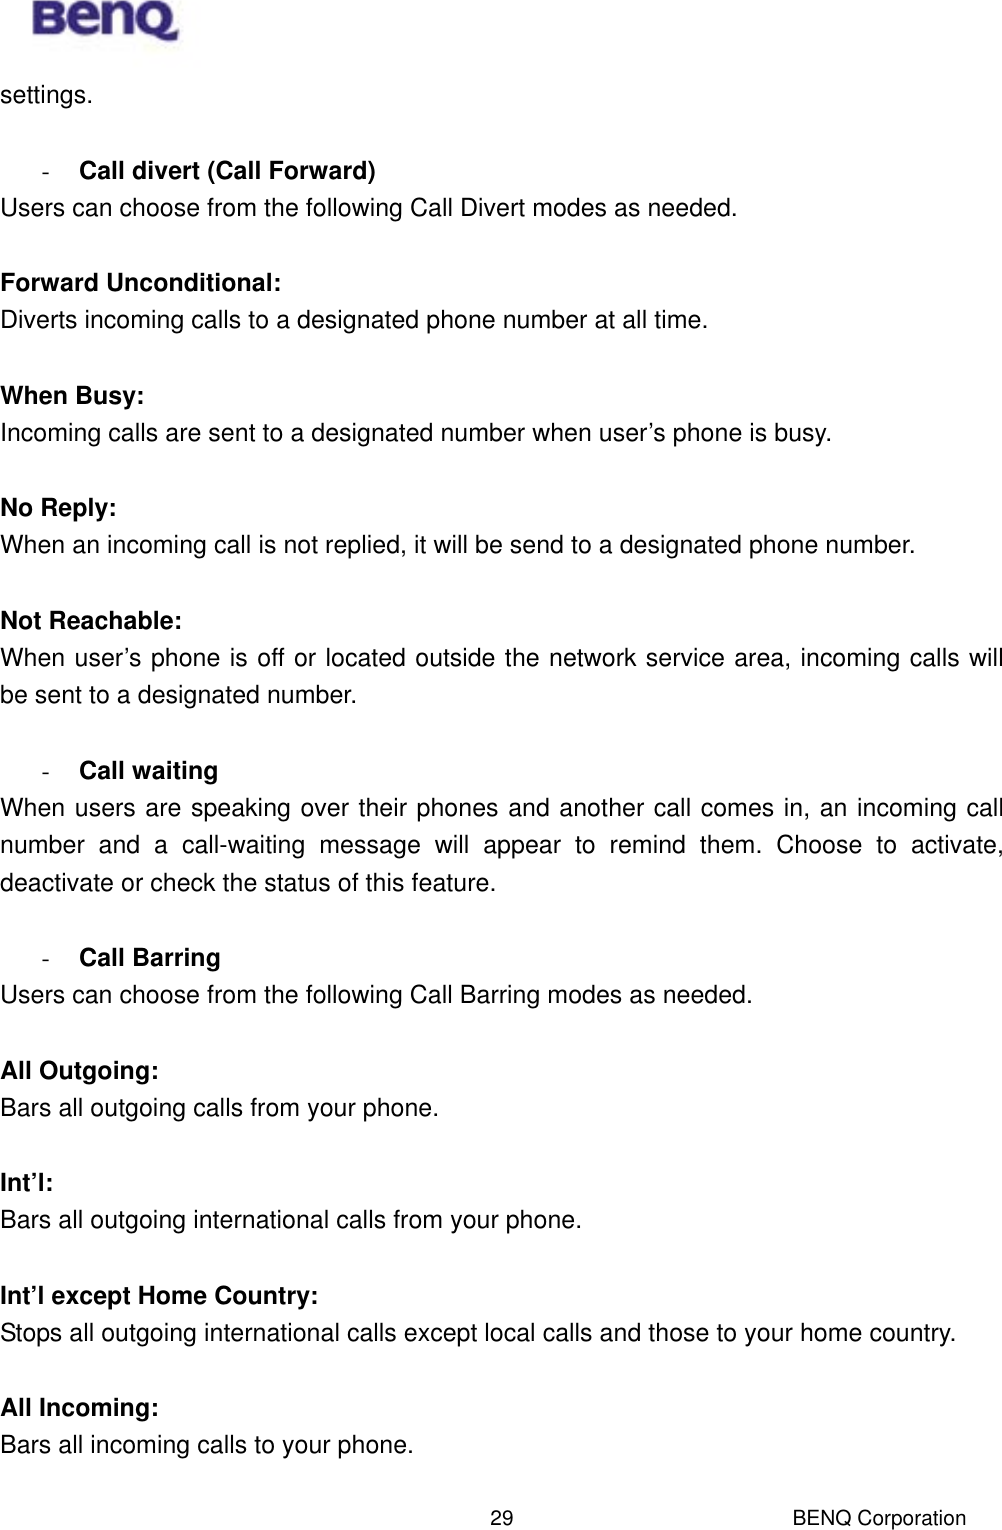  BENQ Corporation 29settings.    -  Call divert (Call Forward) Users can choose from the following Call Divert modes as needed.  Forward Unconditional:  Diverts incoming calls to a designated phone number at all time.  When Busy:  Incoming calls are sent to a designated number when user’s phone is busy.    No Reply:  When an incoming call is not replied, it will be send to a designated phone number.    Not Reachable:  When user’s phone is off or located outside the network service area, incoming calls will be sent to a designated number.  -  Call waiting When users are speaking over their phones and another call comes in, an incoming call number and a call-waiting message will appear to remind them. Choose to activate, deactivate or check the status of this feature.  -  Call Barring Users can choose from the following Call Barring modes as needed.  All Outgoing:  Bars all outgoing calls from your phone.    Int’l:  Bars all outgoing international calls from your phone.  Int’l except Home Country:  Stops all outgoing international calls except local calls and those to your home country.  All Incoming:  Bars all incoming calls to your phone.  